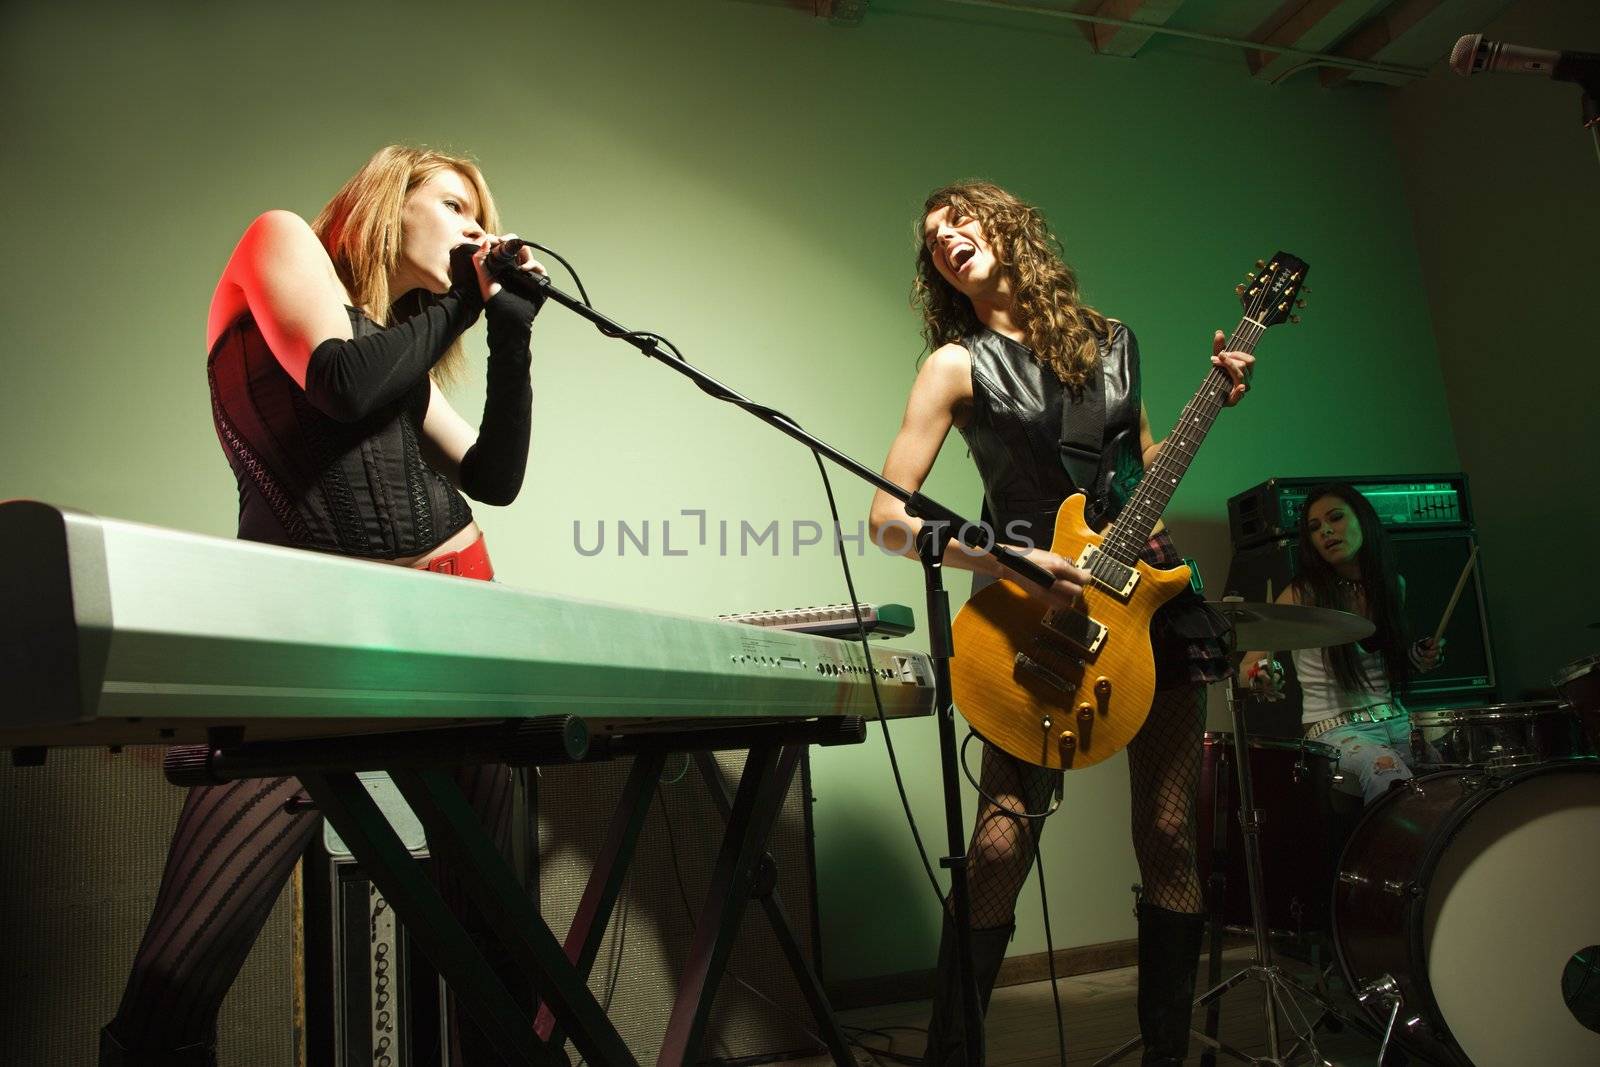 Caucasian girl band playing instruments.